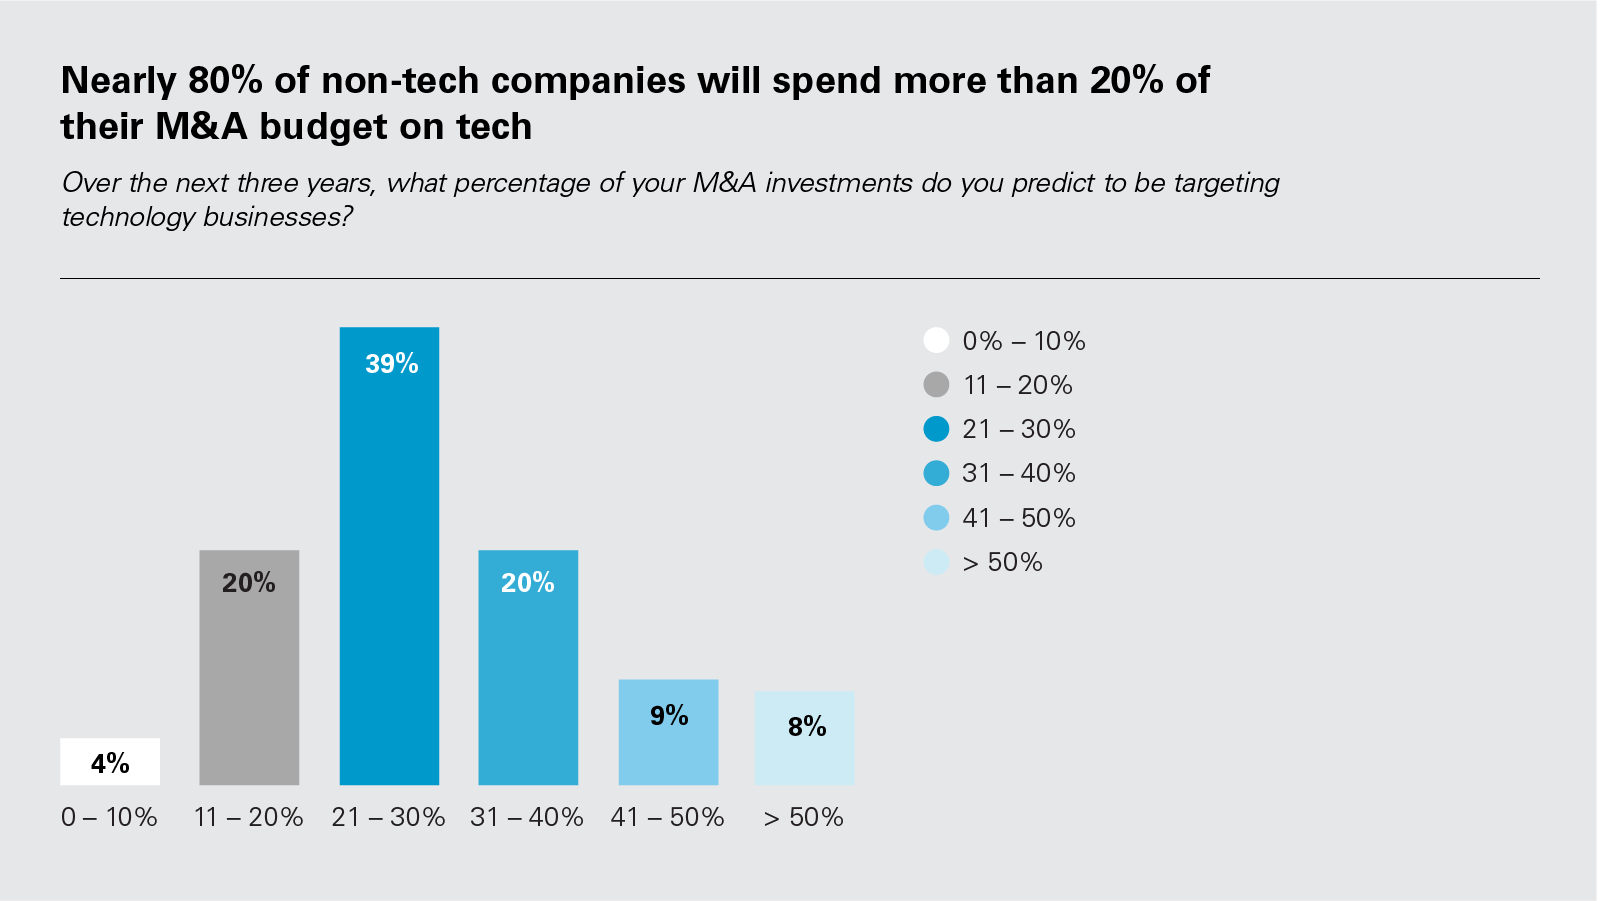 Nearly 80% of non-tech companies will spend more than 20% of their M&A budget on tech